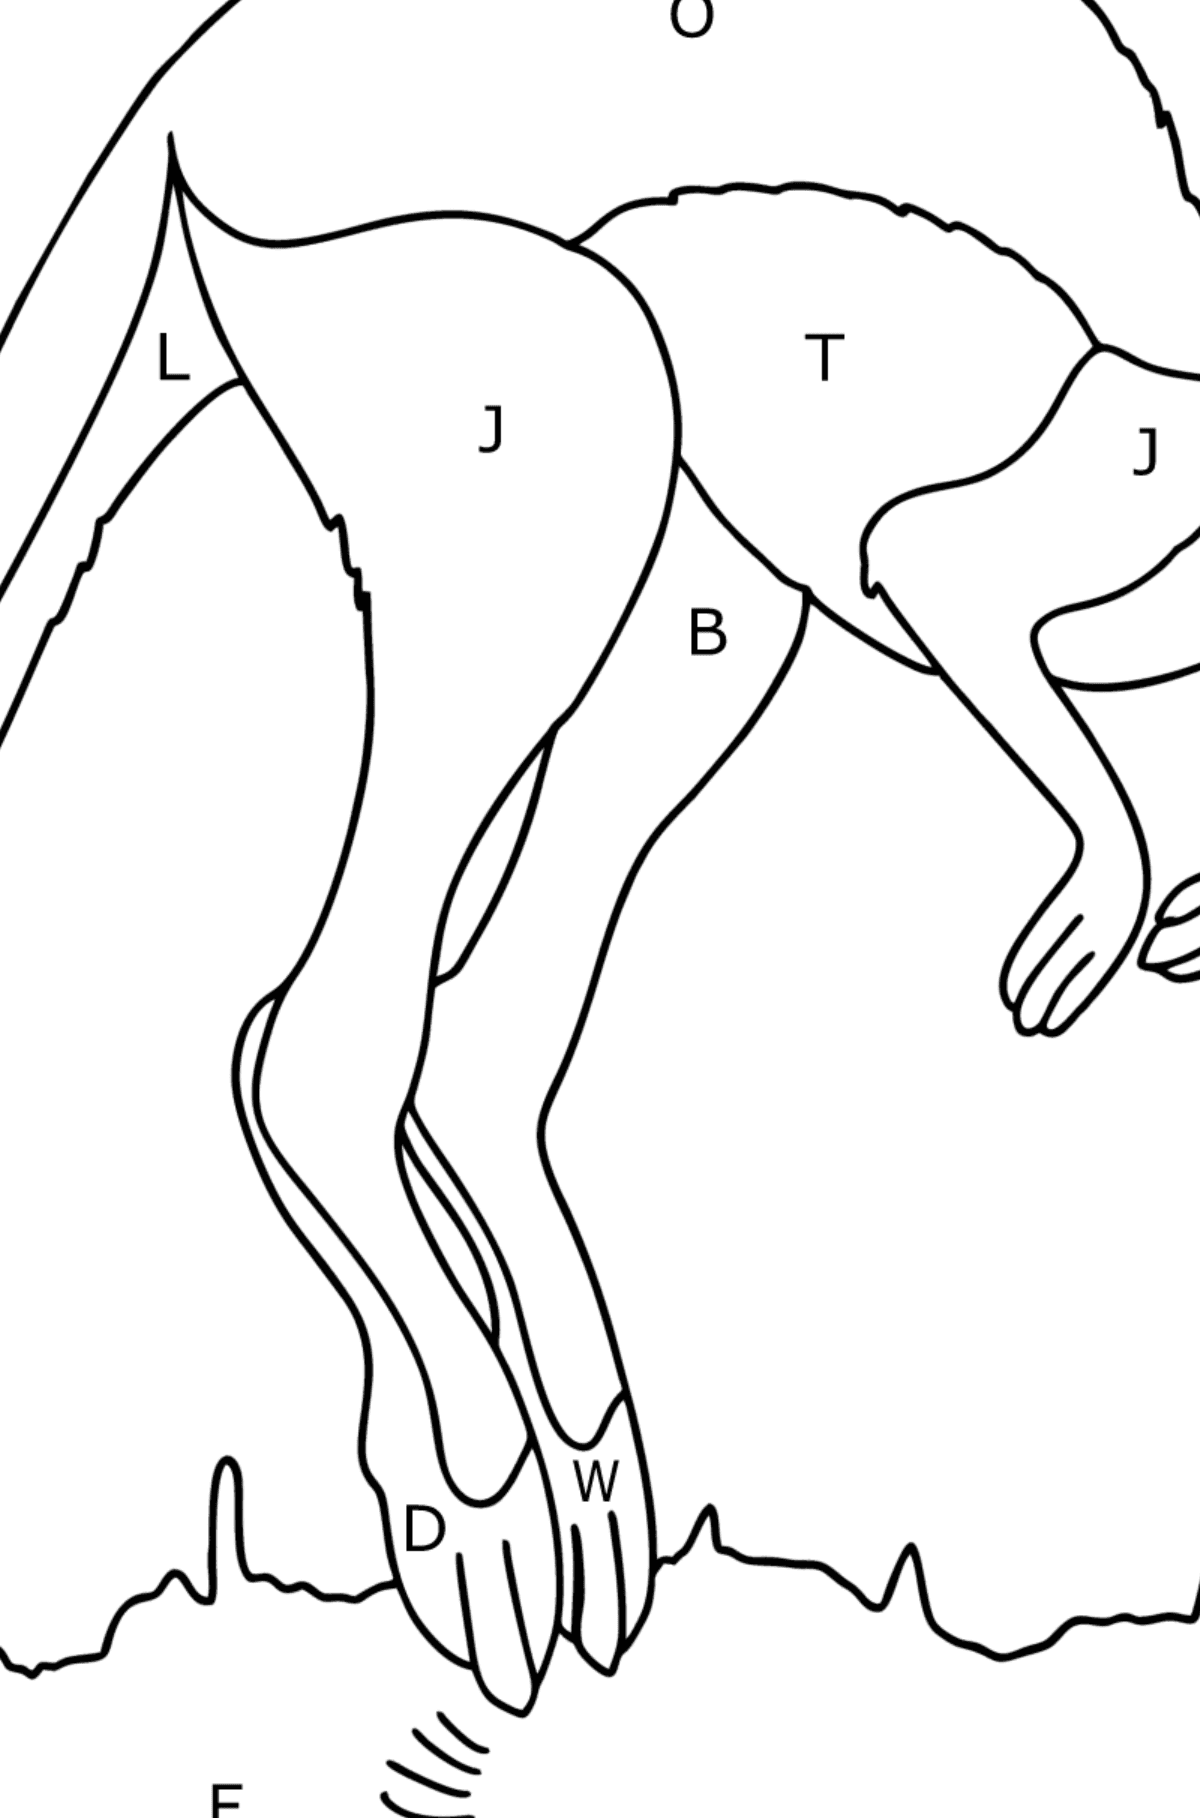 Jumping Kangaroo coloring page - Coloring by Letters for Kids